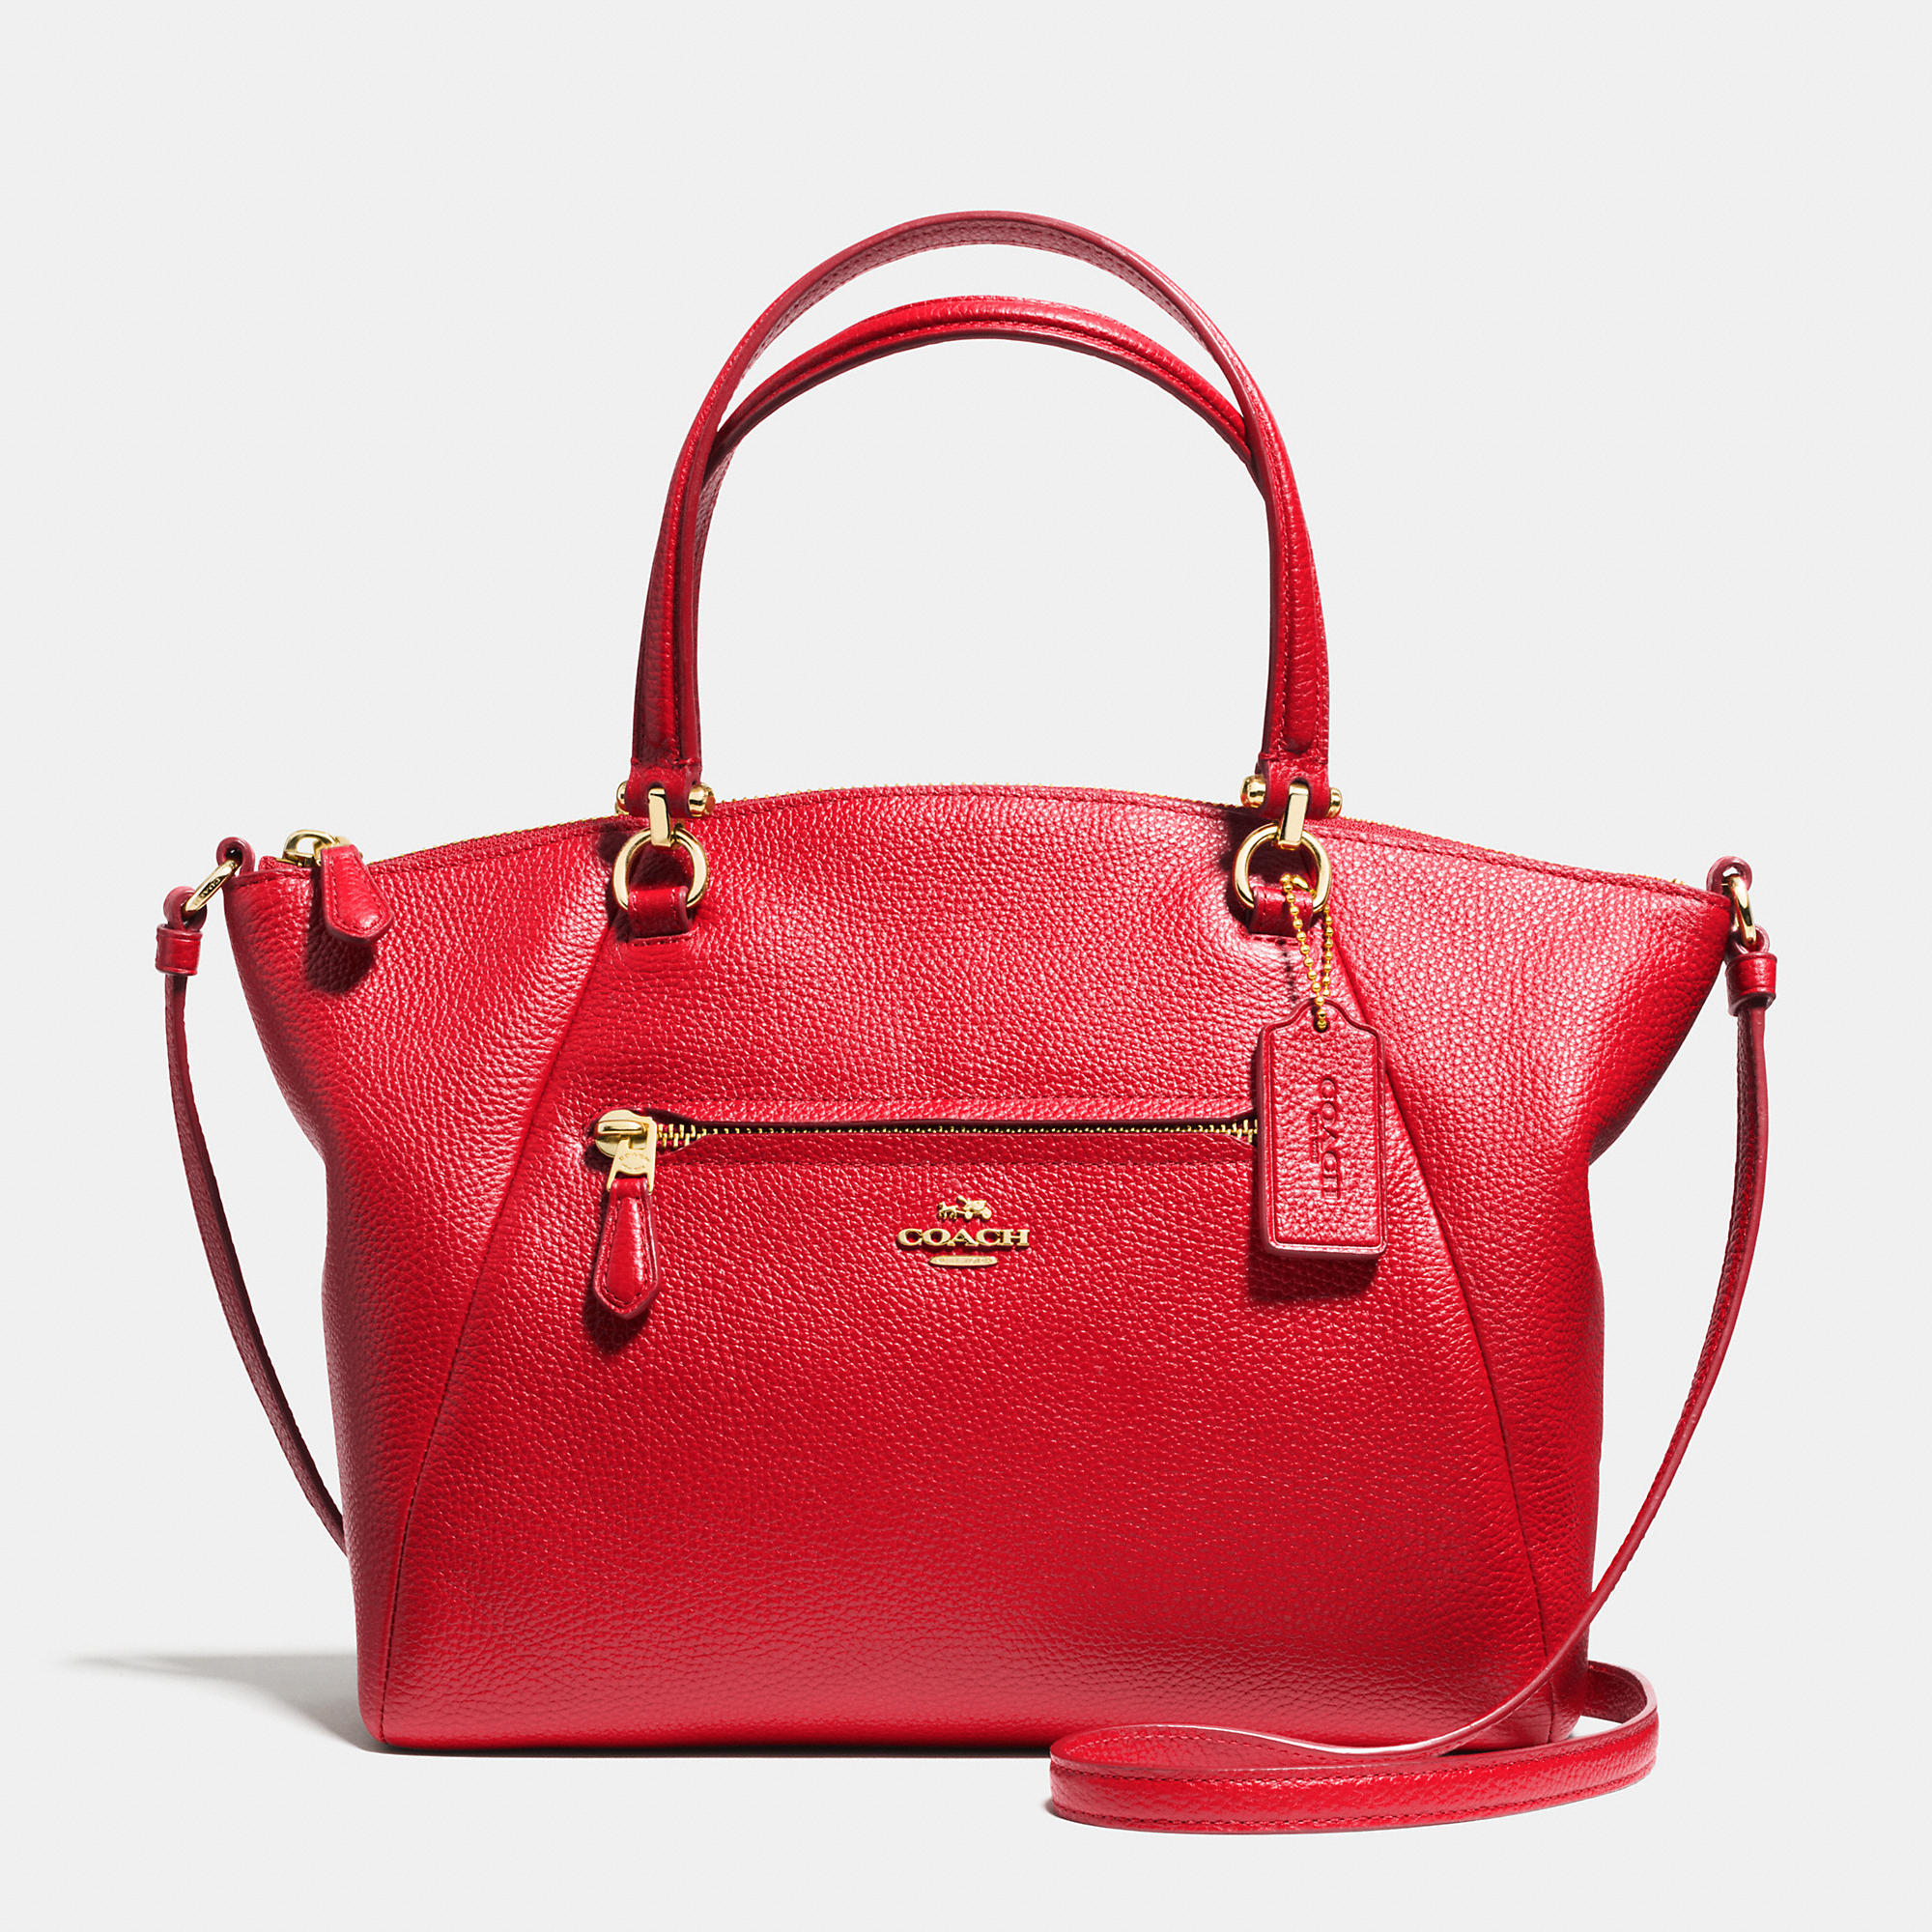 Lyst - Coach Prairie Satchel In Pebble Leather in Red